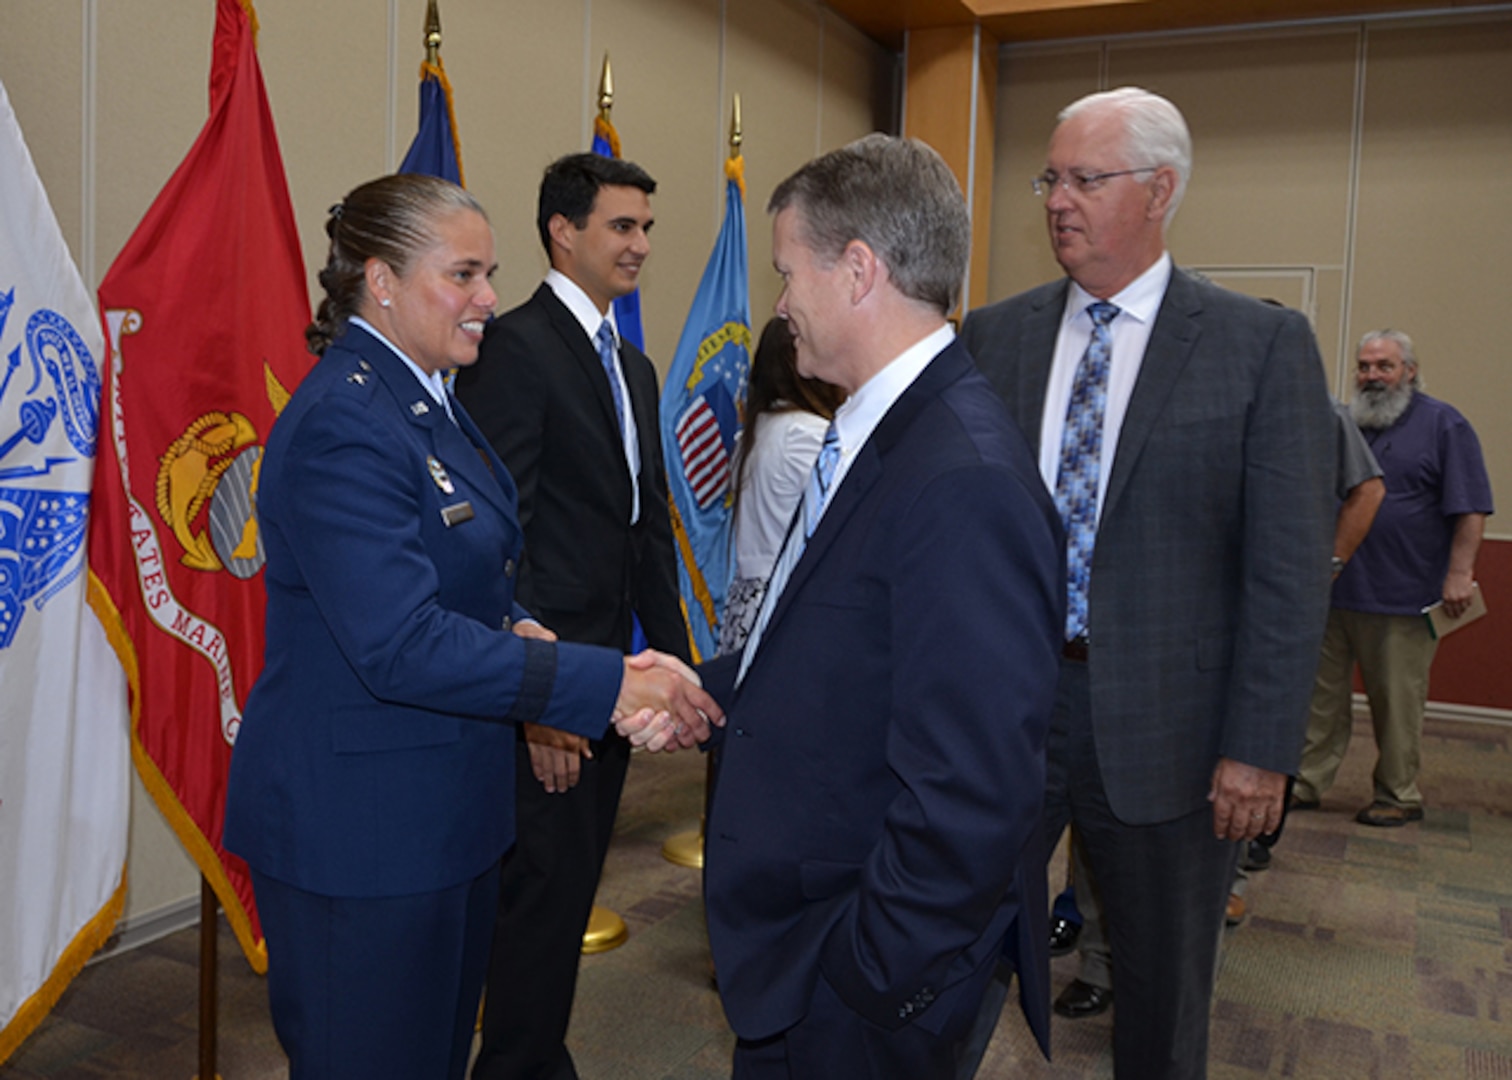 Air Force Brig. Gen. Linda Hurry shakes hands with David Gibson, Defense Logistics Agency Installation Support at Richmond site director, in her reception line after she assumed command of Defense Logistics Agency Aviation June 28, 2017 during a change of command ceremony on Defense Supply Center Richmond, Virginia.  